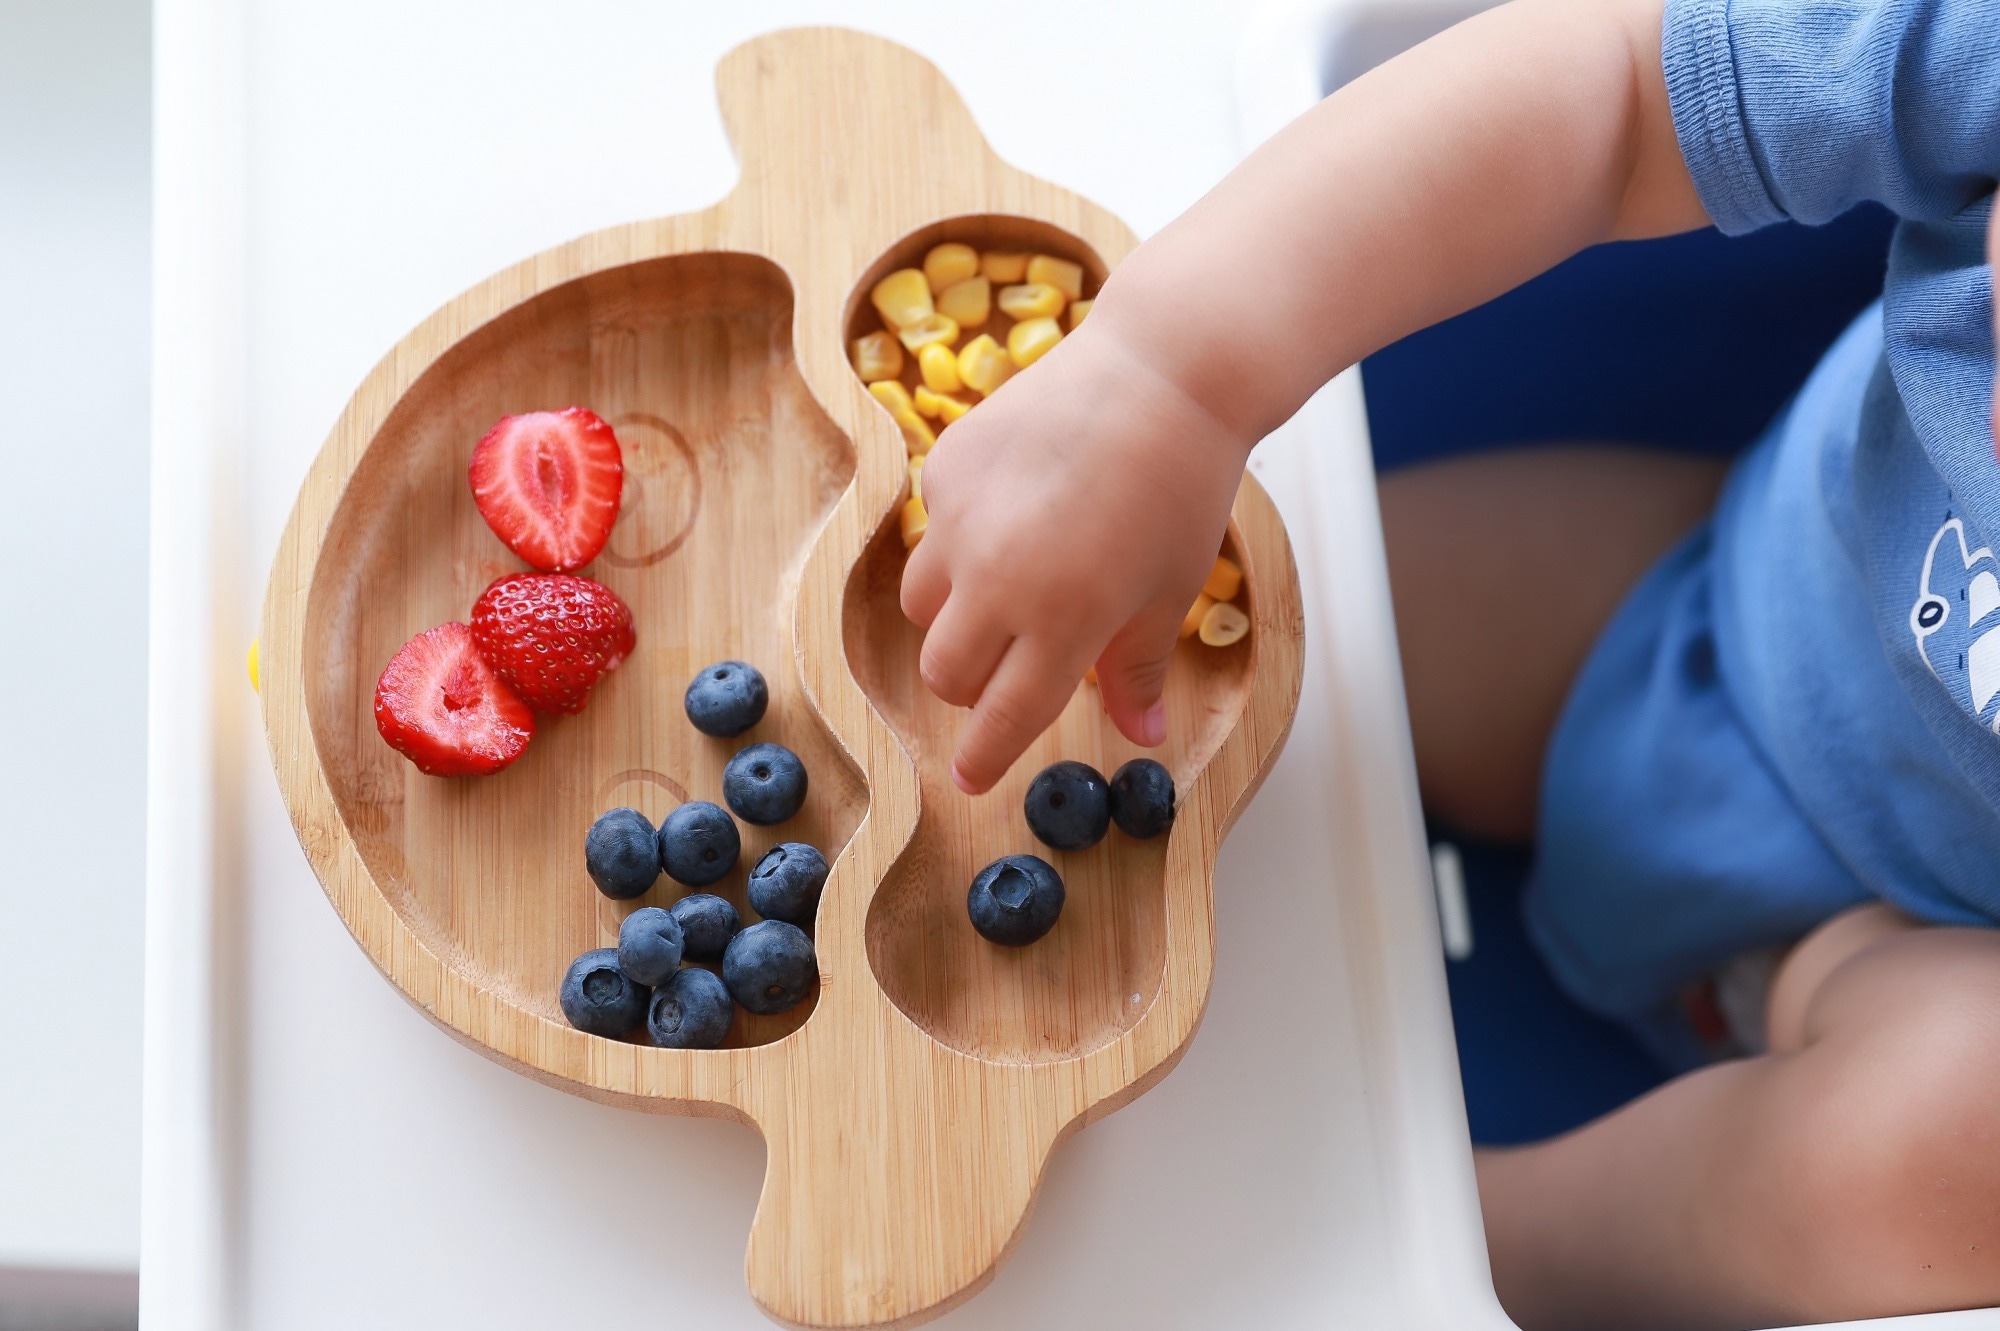 New wholesome consuming index tailor-made for toddlers promotes lifelong dietary habits